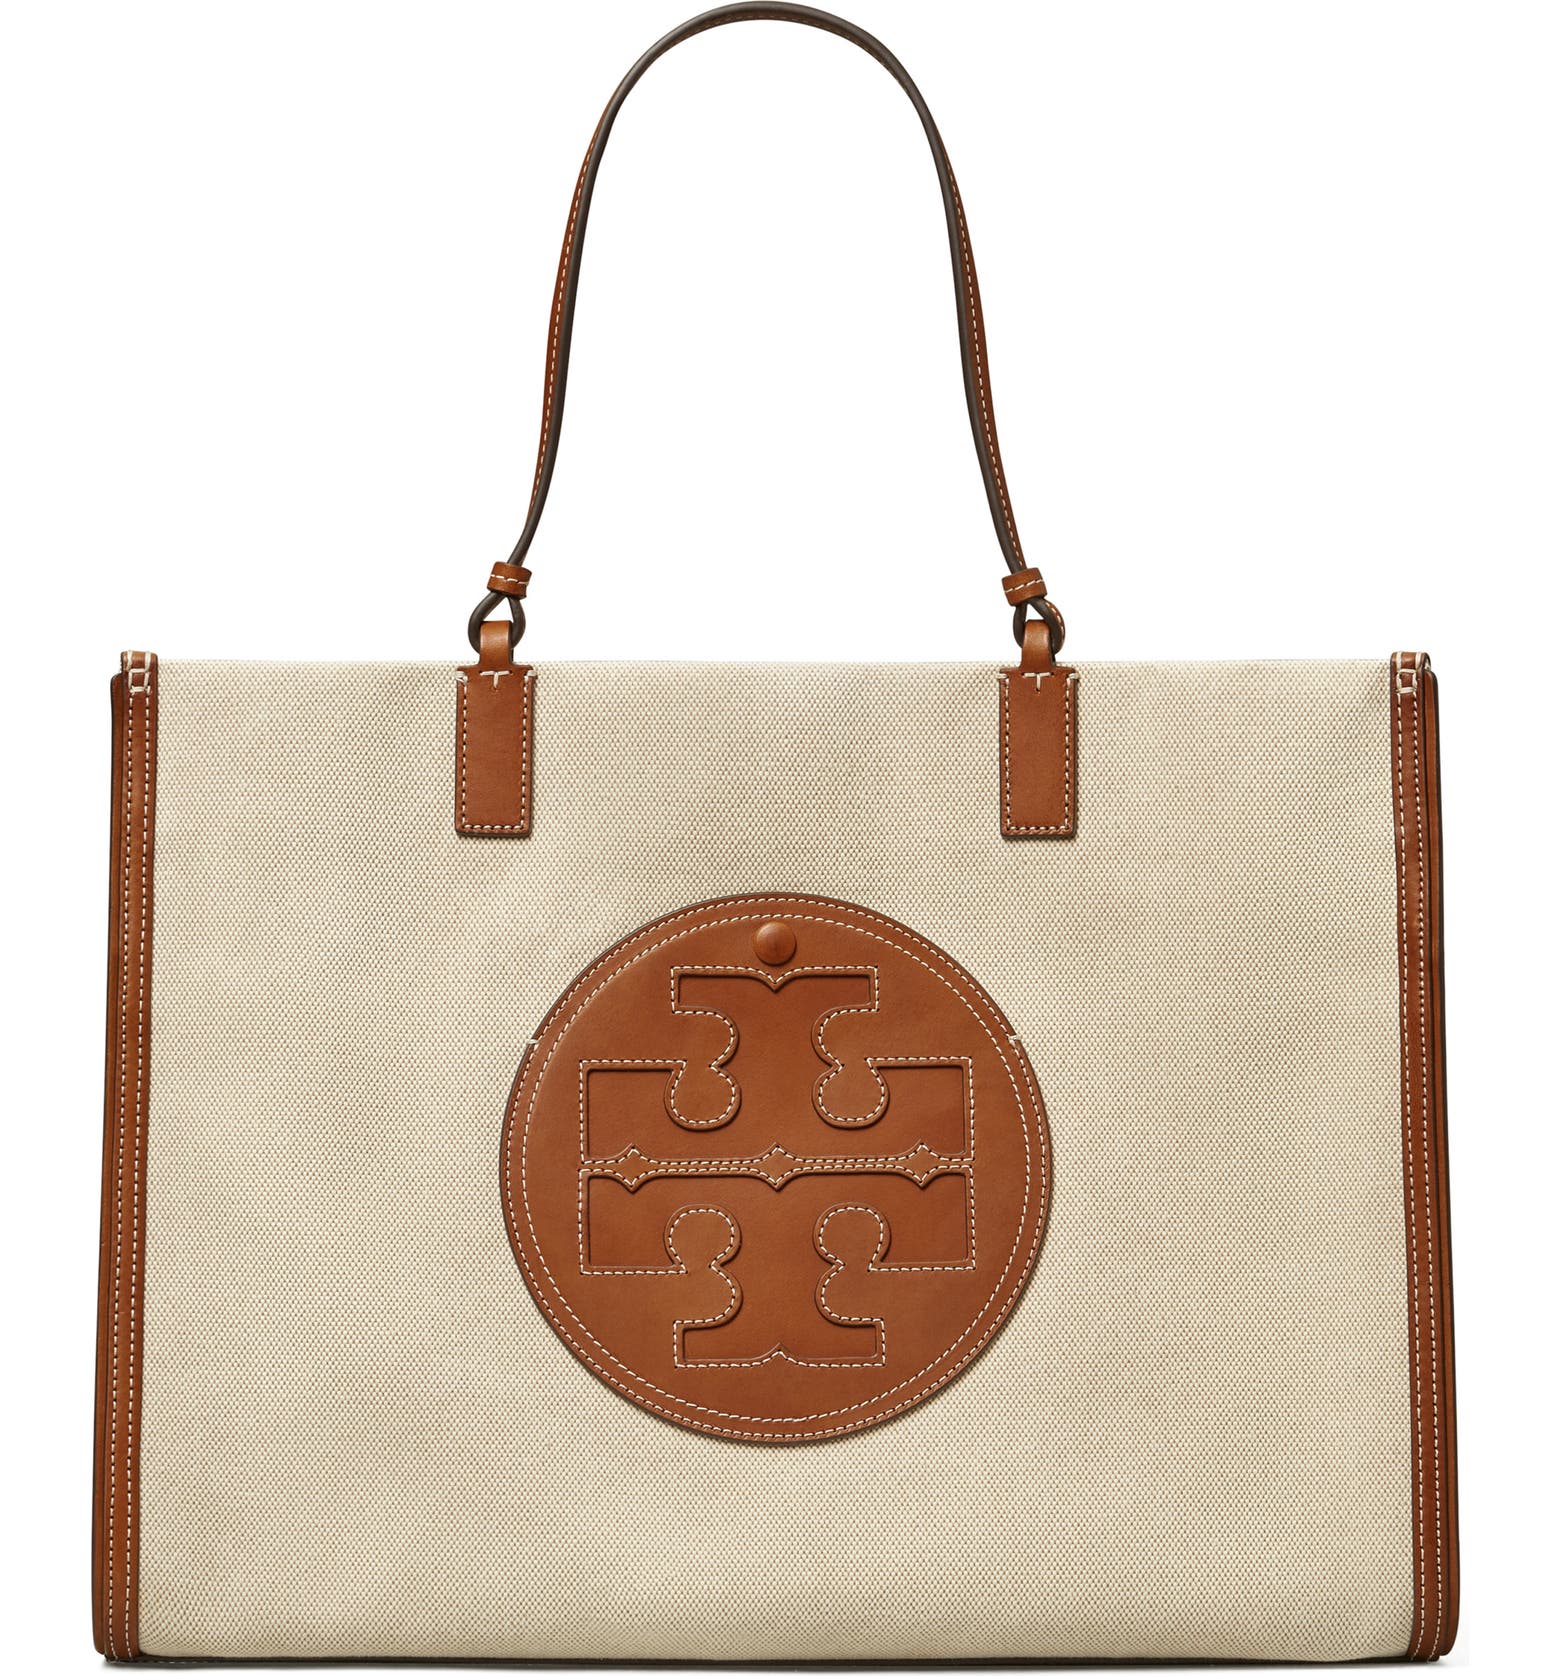 Canvas cream and tan Ella tote from Tory Burch